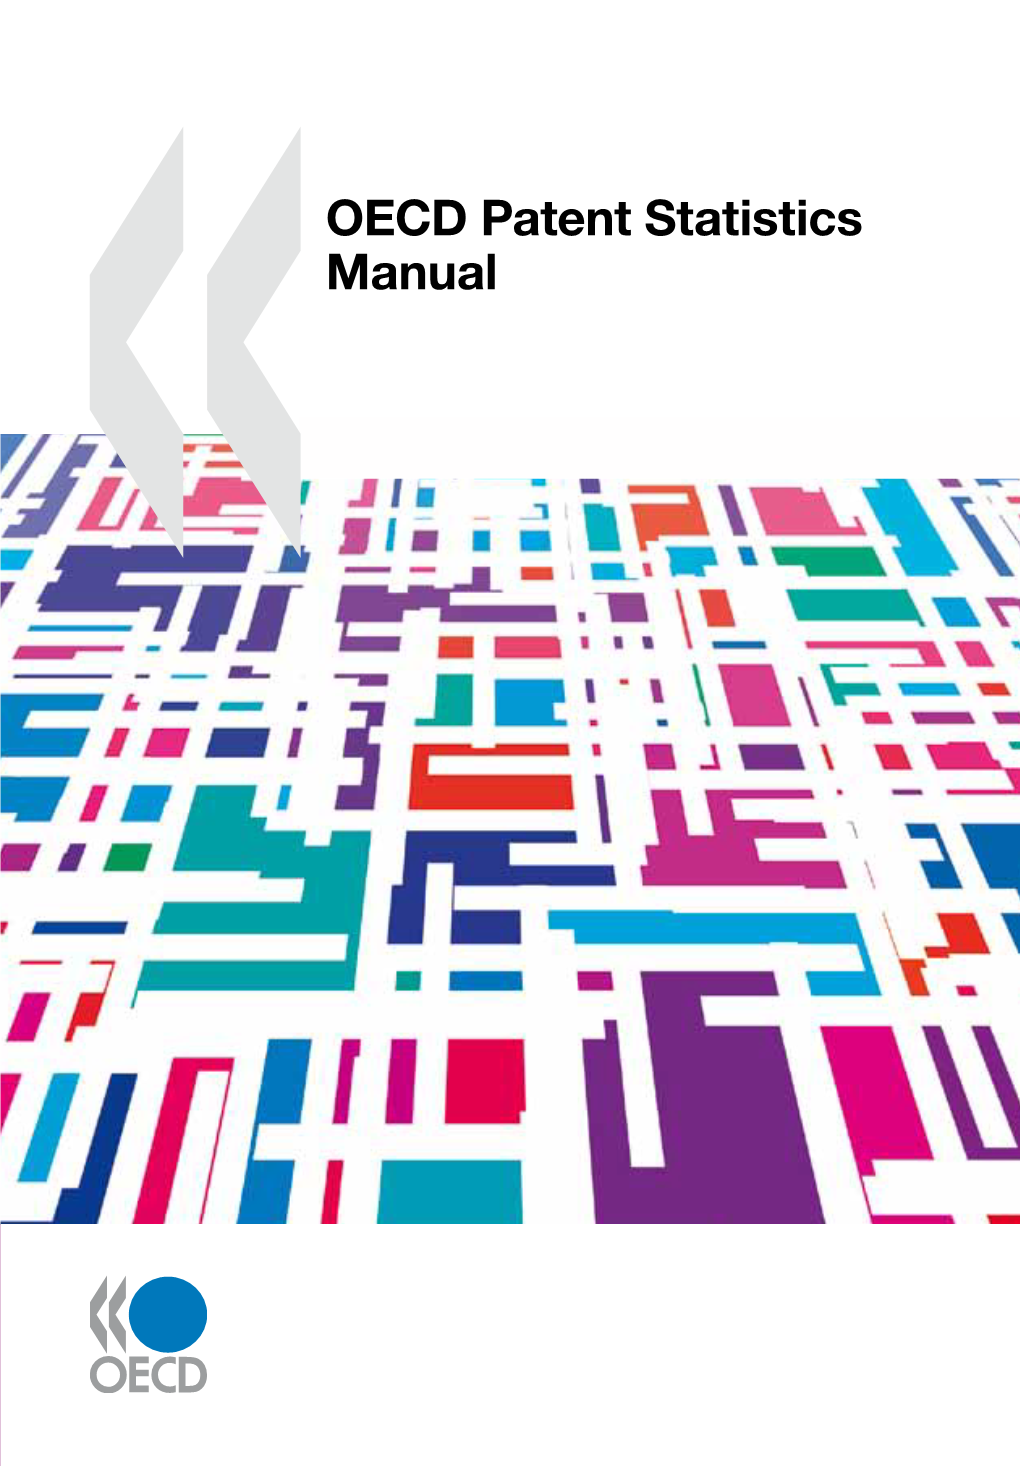 OECD Patent Statistics Manual Patent Data Are an Outstanding Resource for the Study of Technical Change